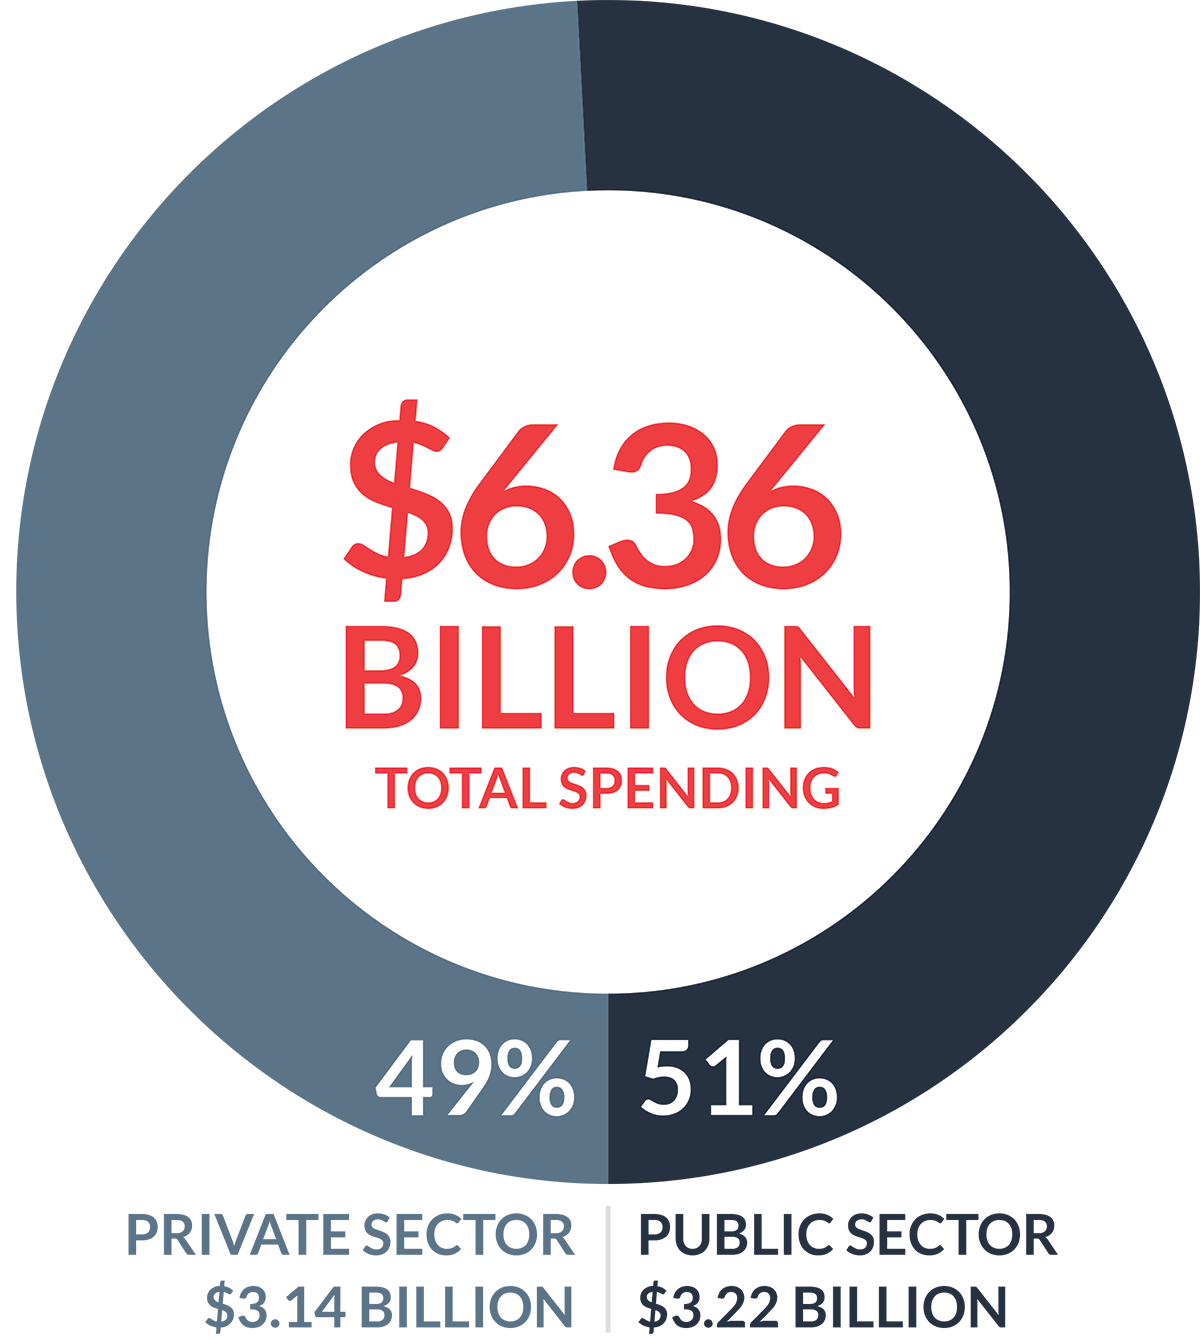 total spending chart broken down between private and public sector